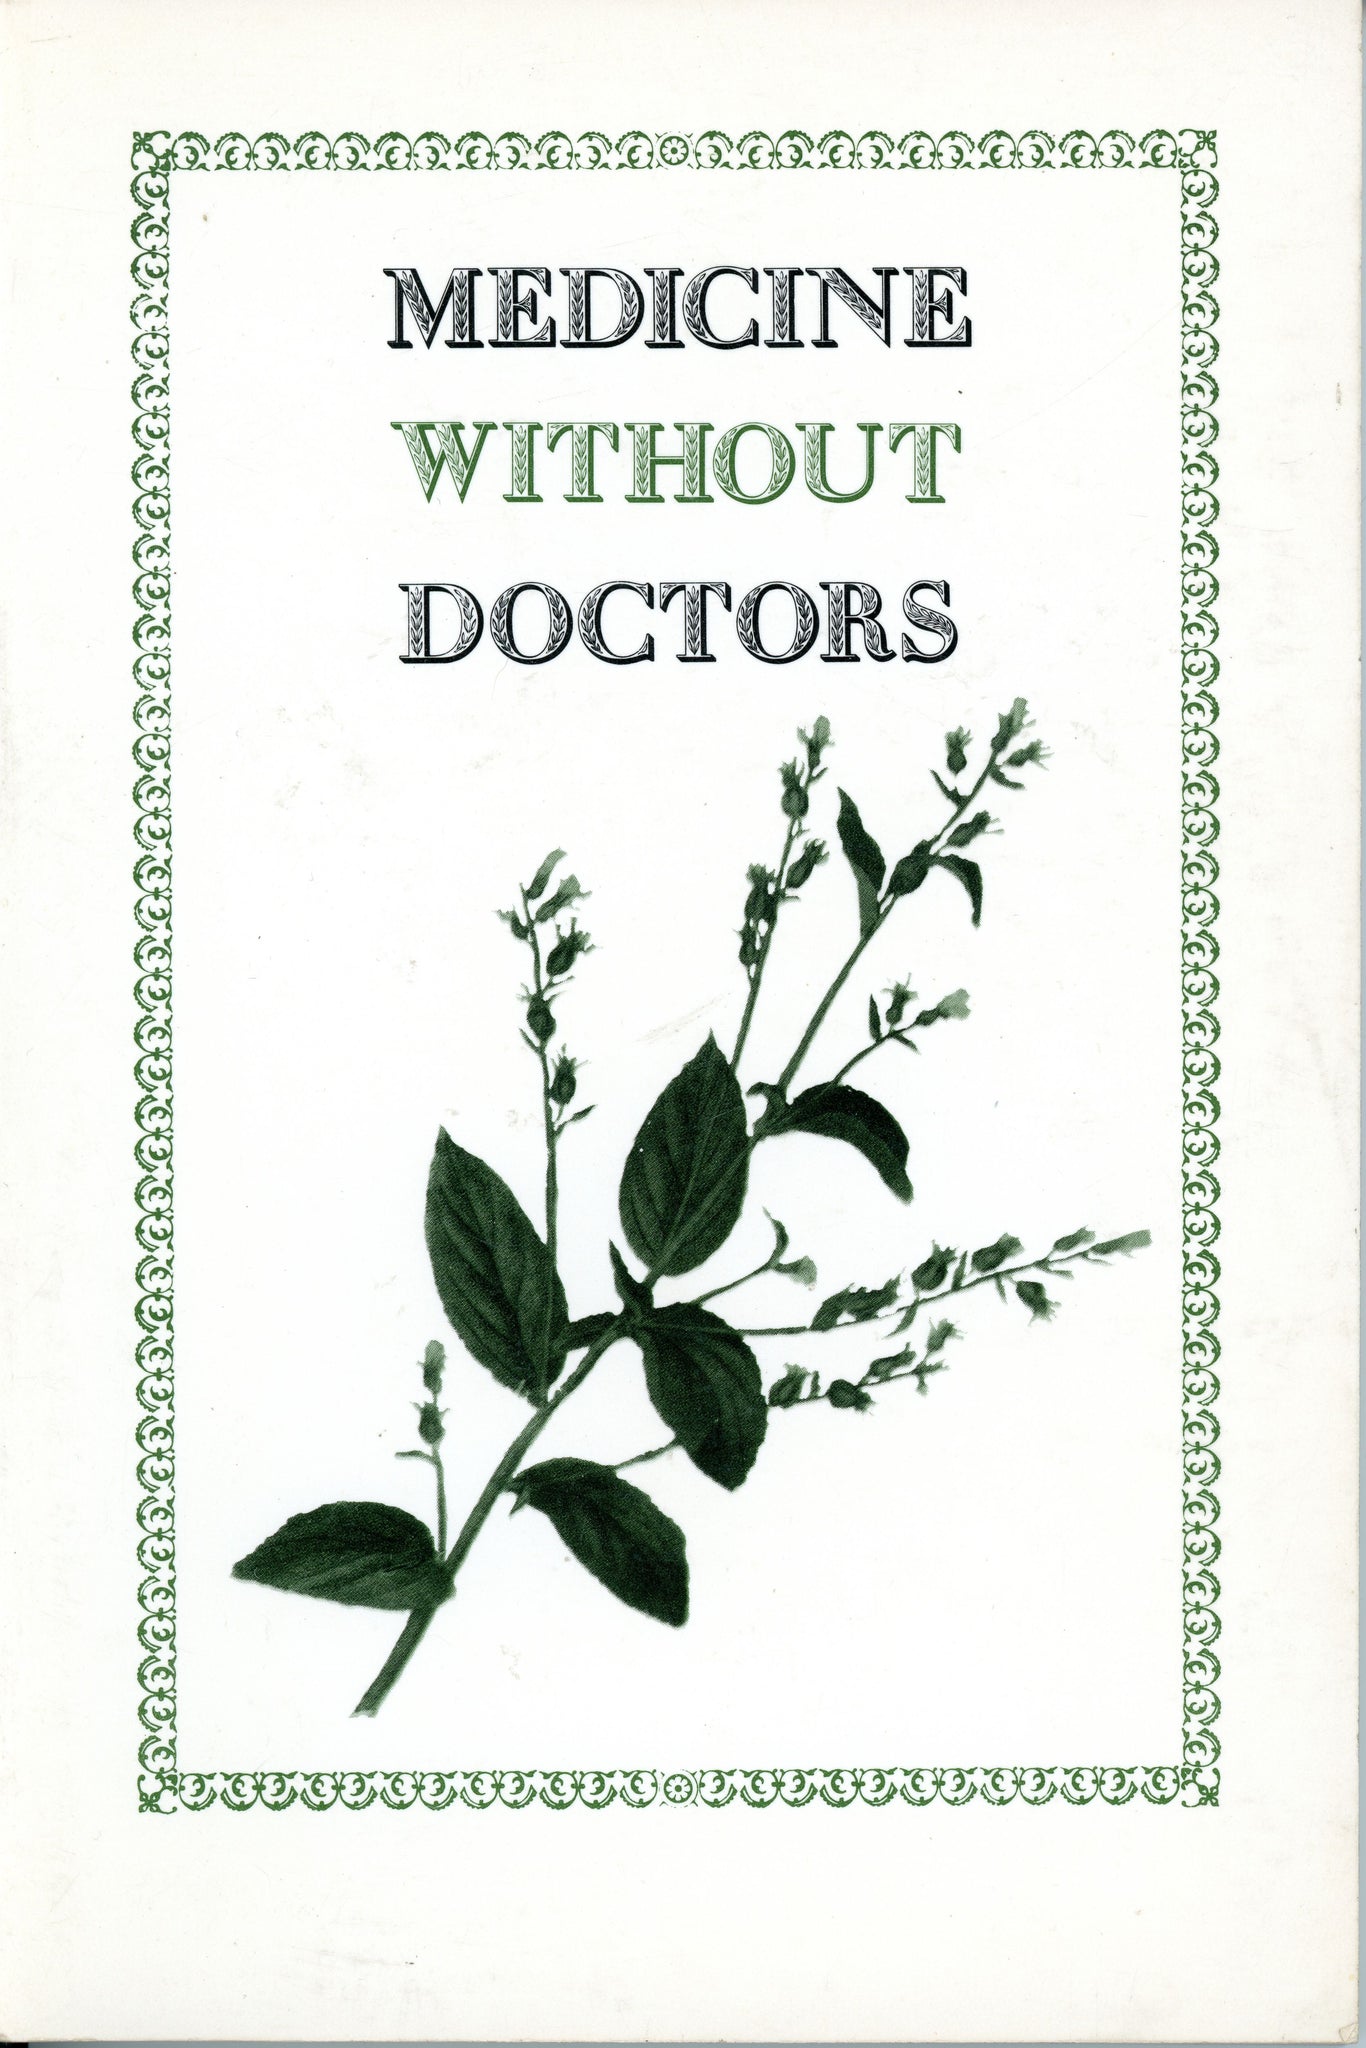 Medicine without Doctors